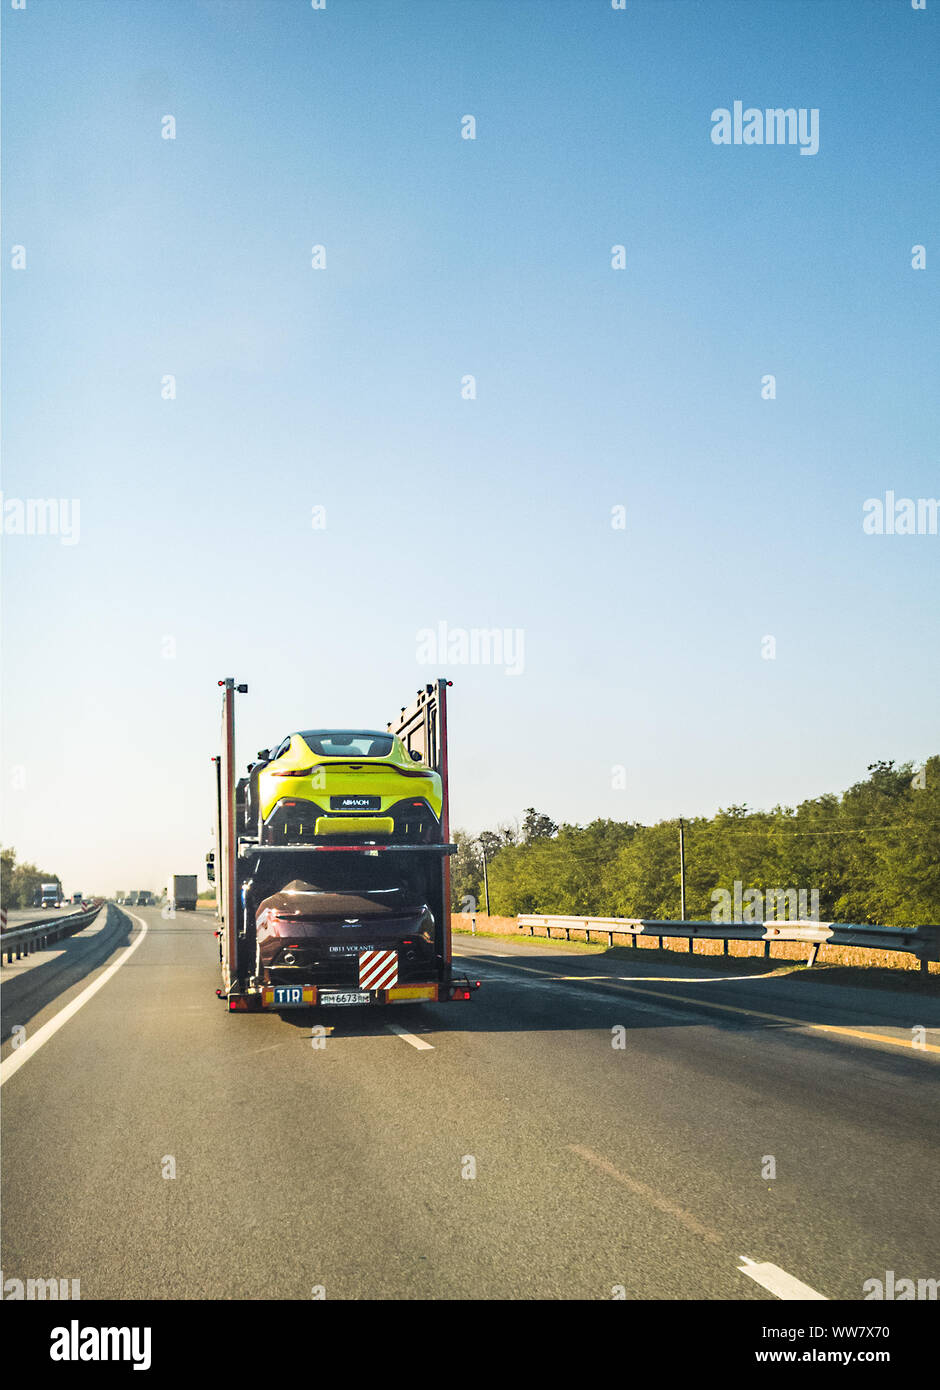 2018: rack-truck moves along scenic highway laden with Aston Martin sportcars Stock Photo